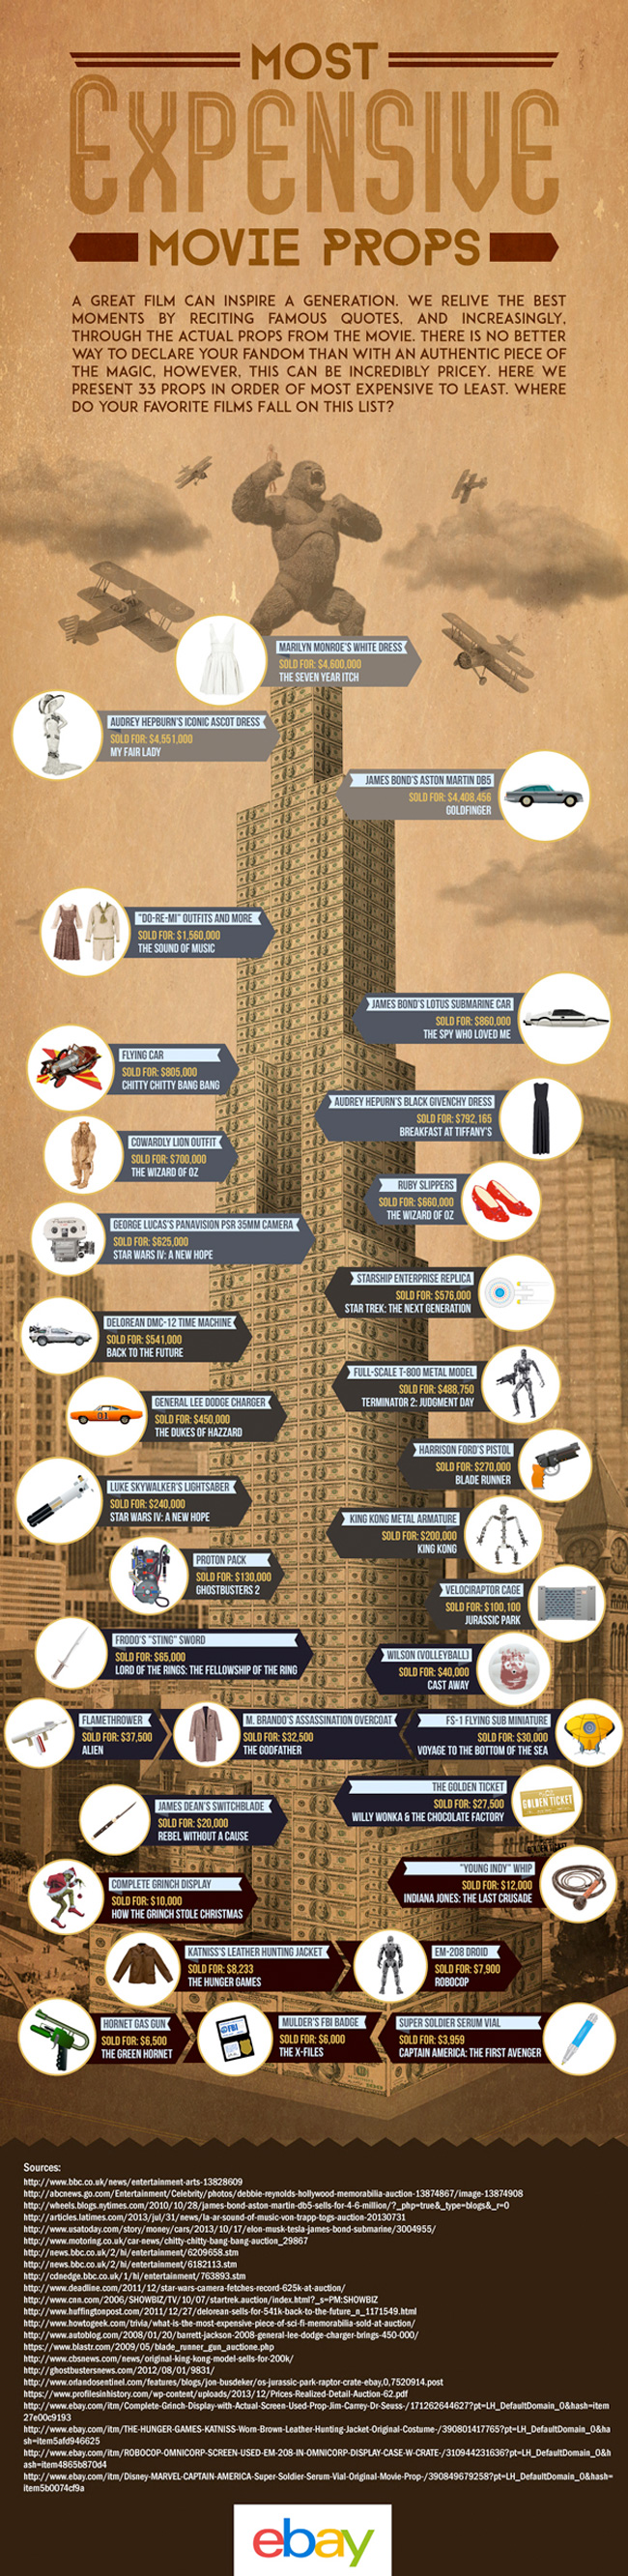 mostexpensive-movieprops-infographic-large.jpg